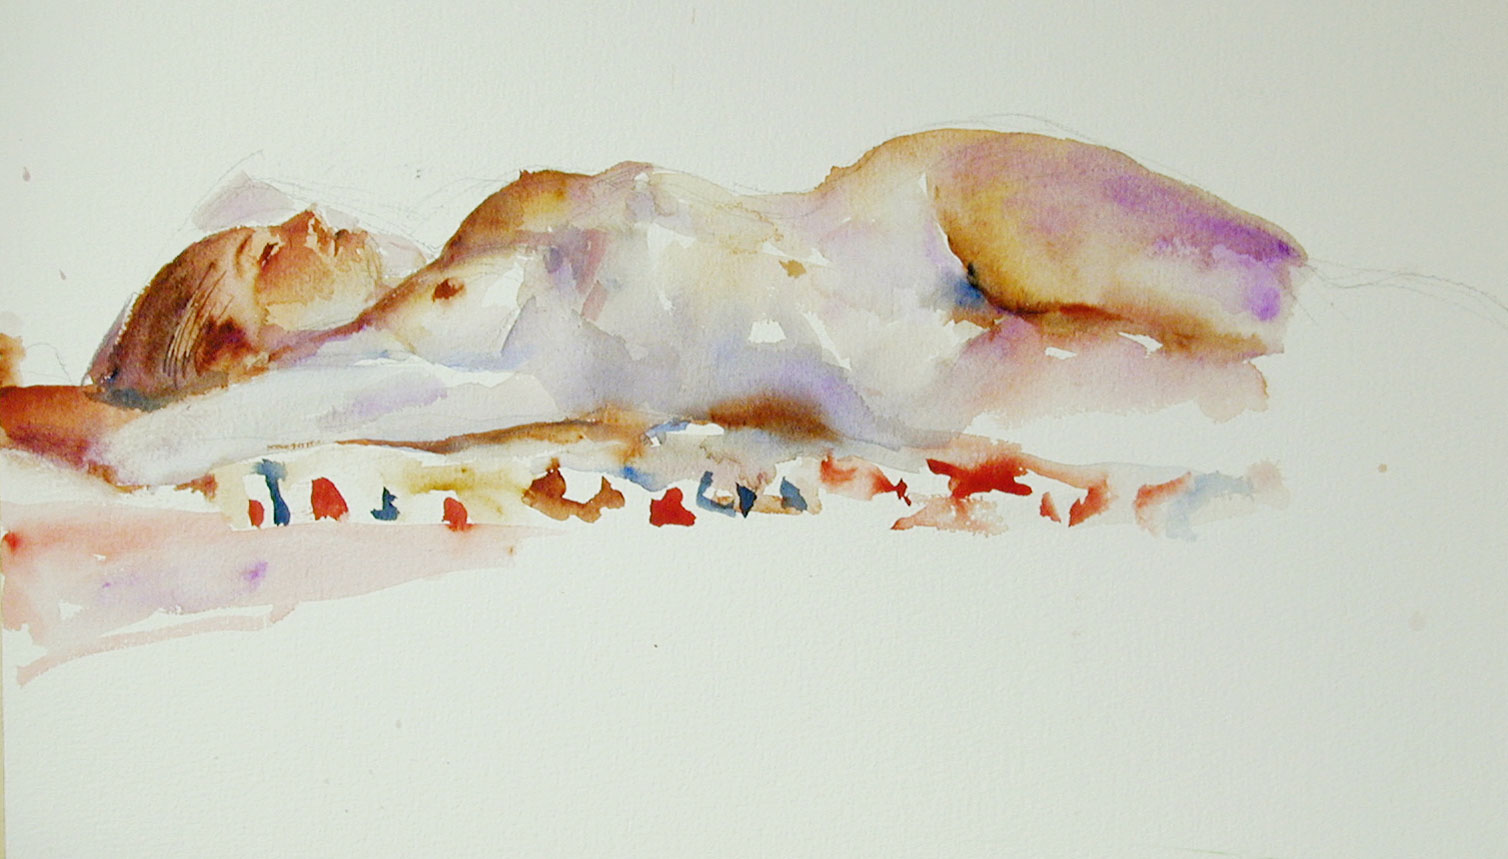 Nude Reclined 23, watercolour on Strathmore 200 ib.  16 X 20 in. copyright Brent Lynch.